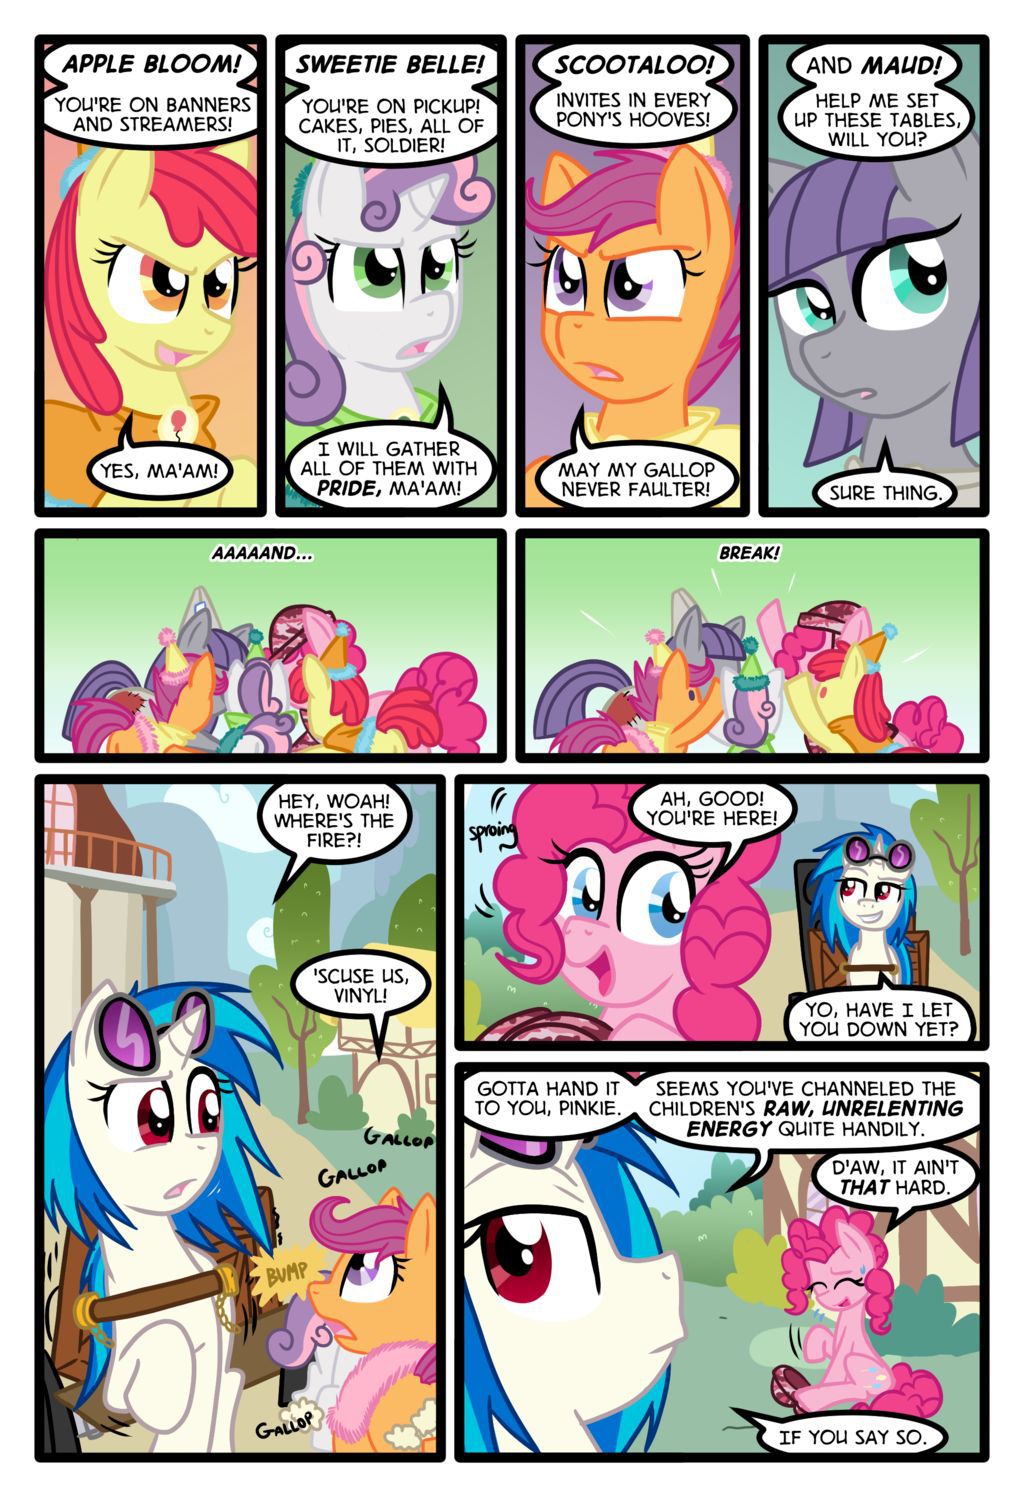 [Zaron] Lonely Hooves (My Little Pony: Friendship is Magic) [English] [Ongoing] 41